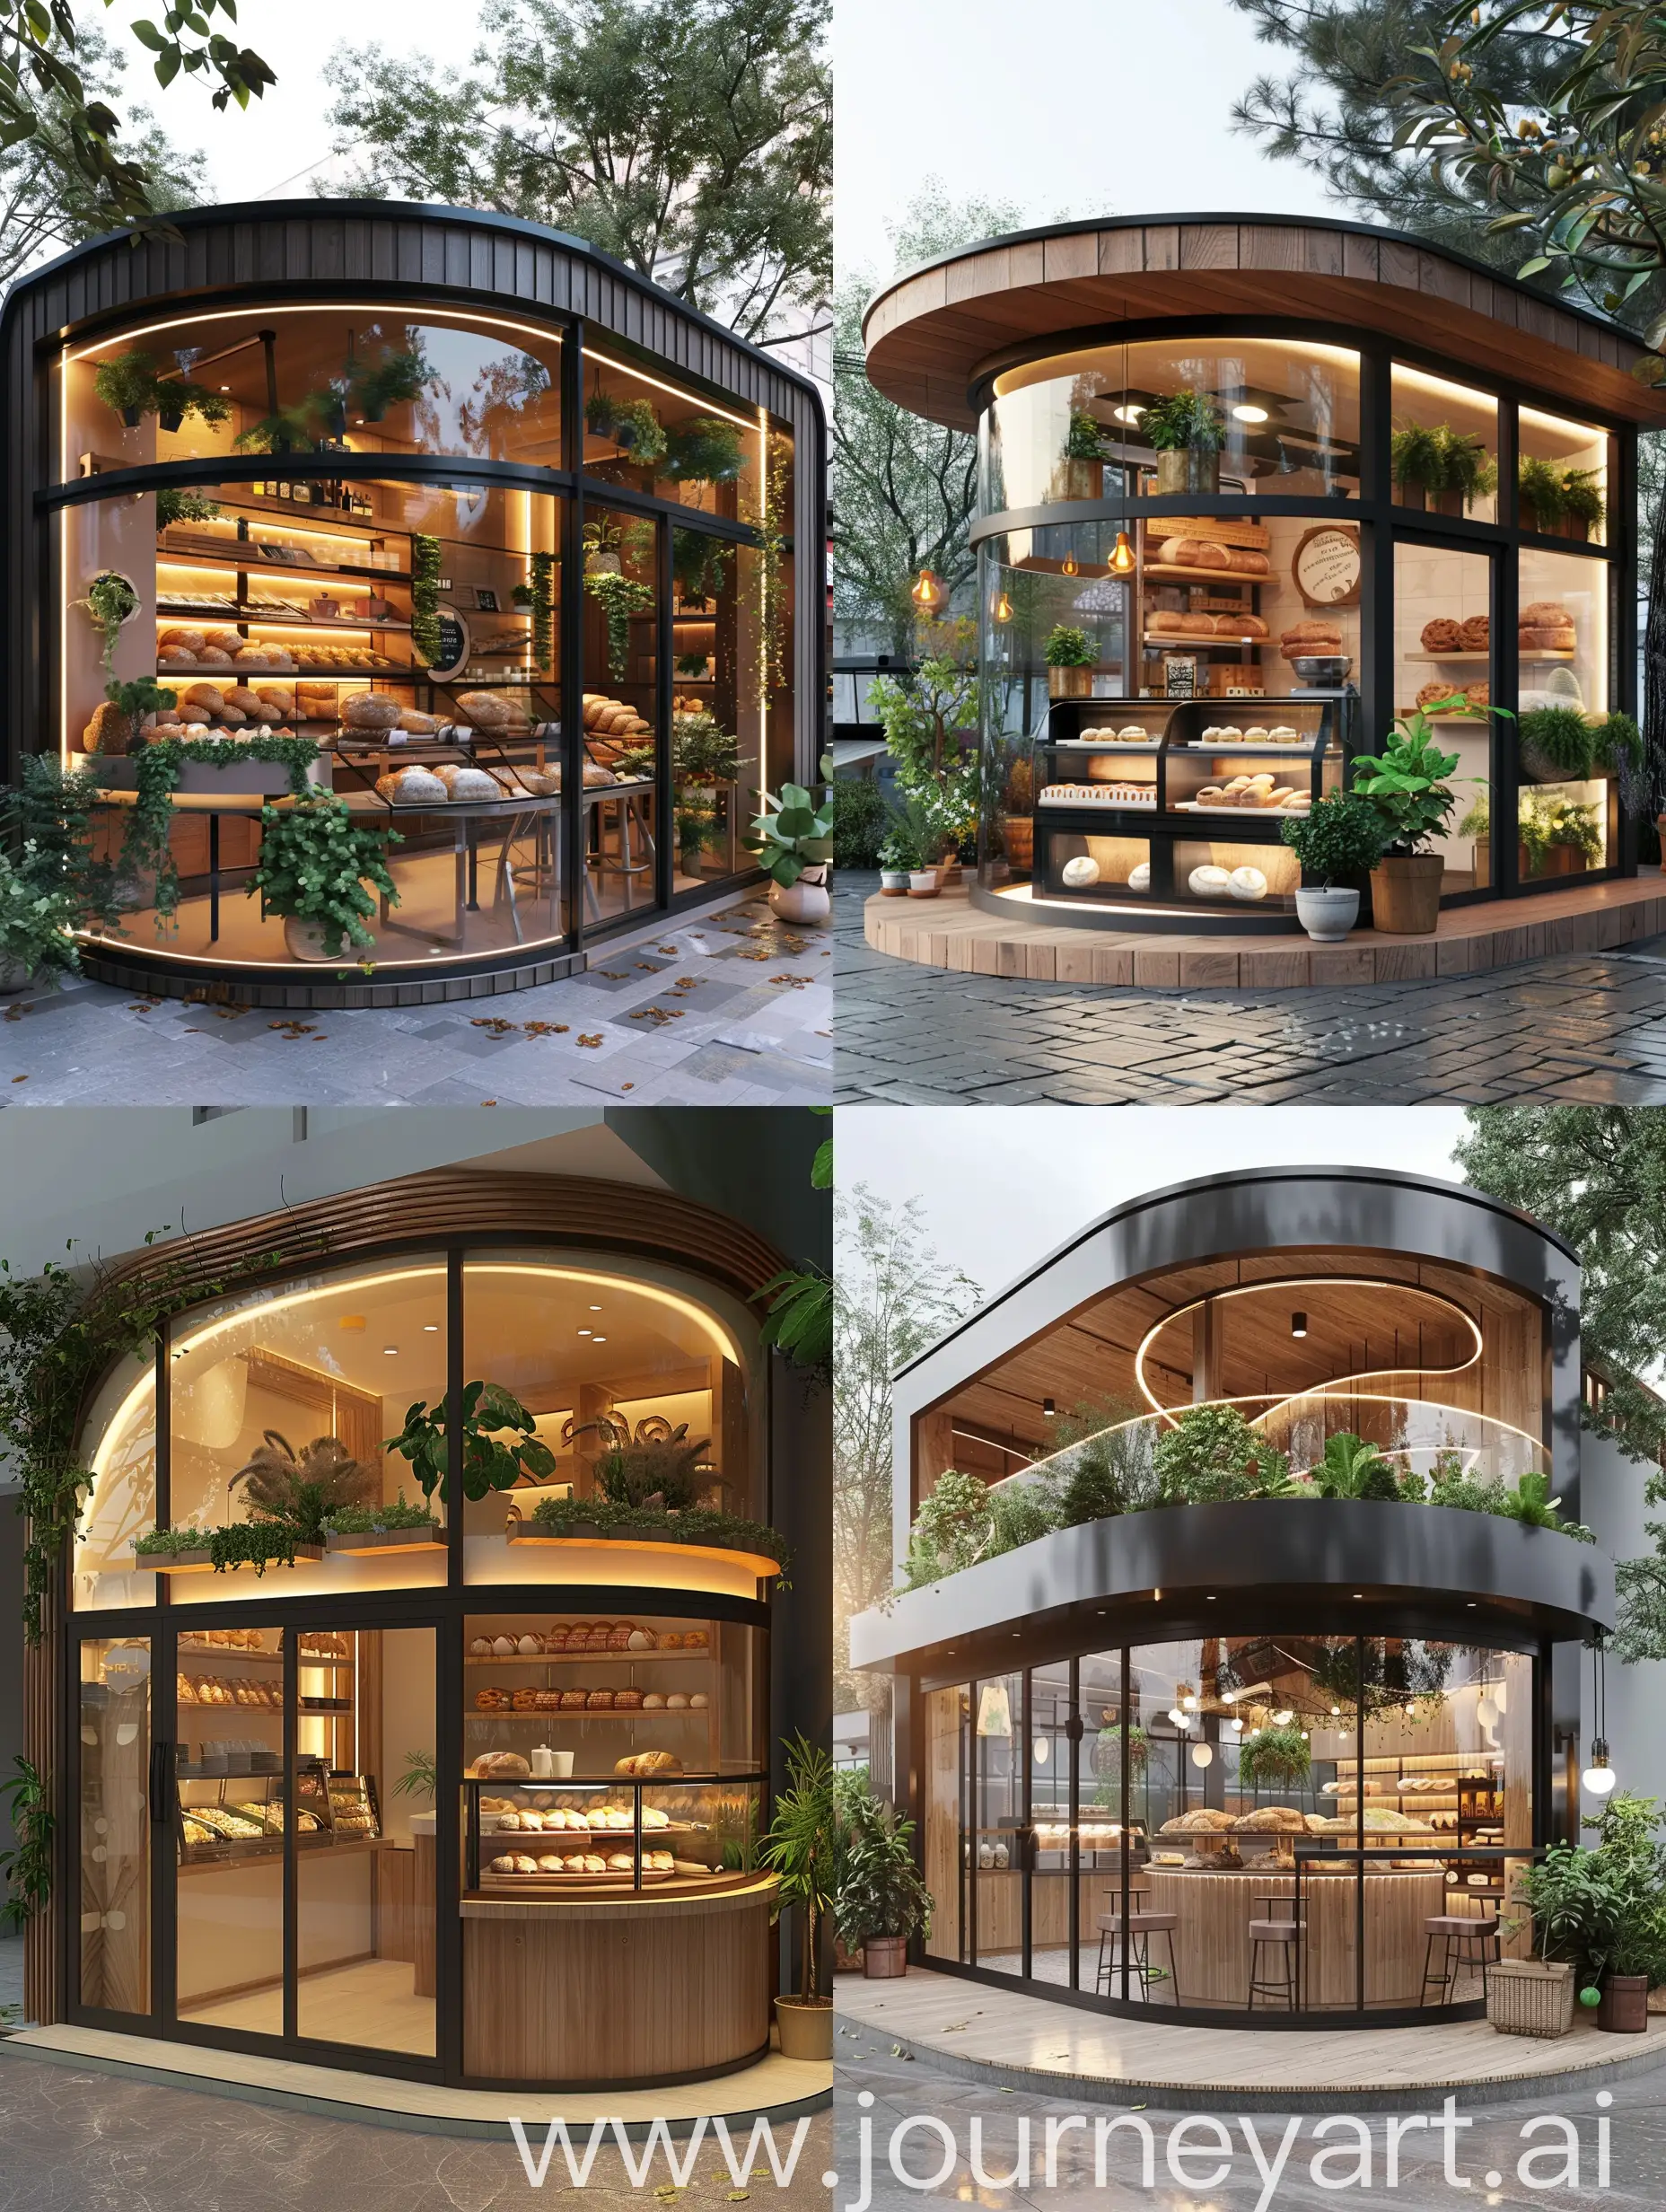 Modern-SemiCircular-Bakery-with-Cozy-Interior-and-Large-Windows